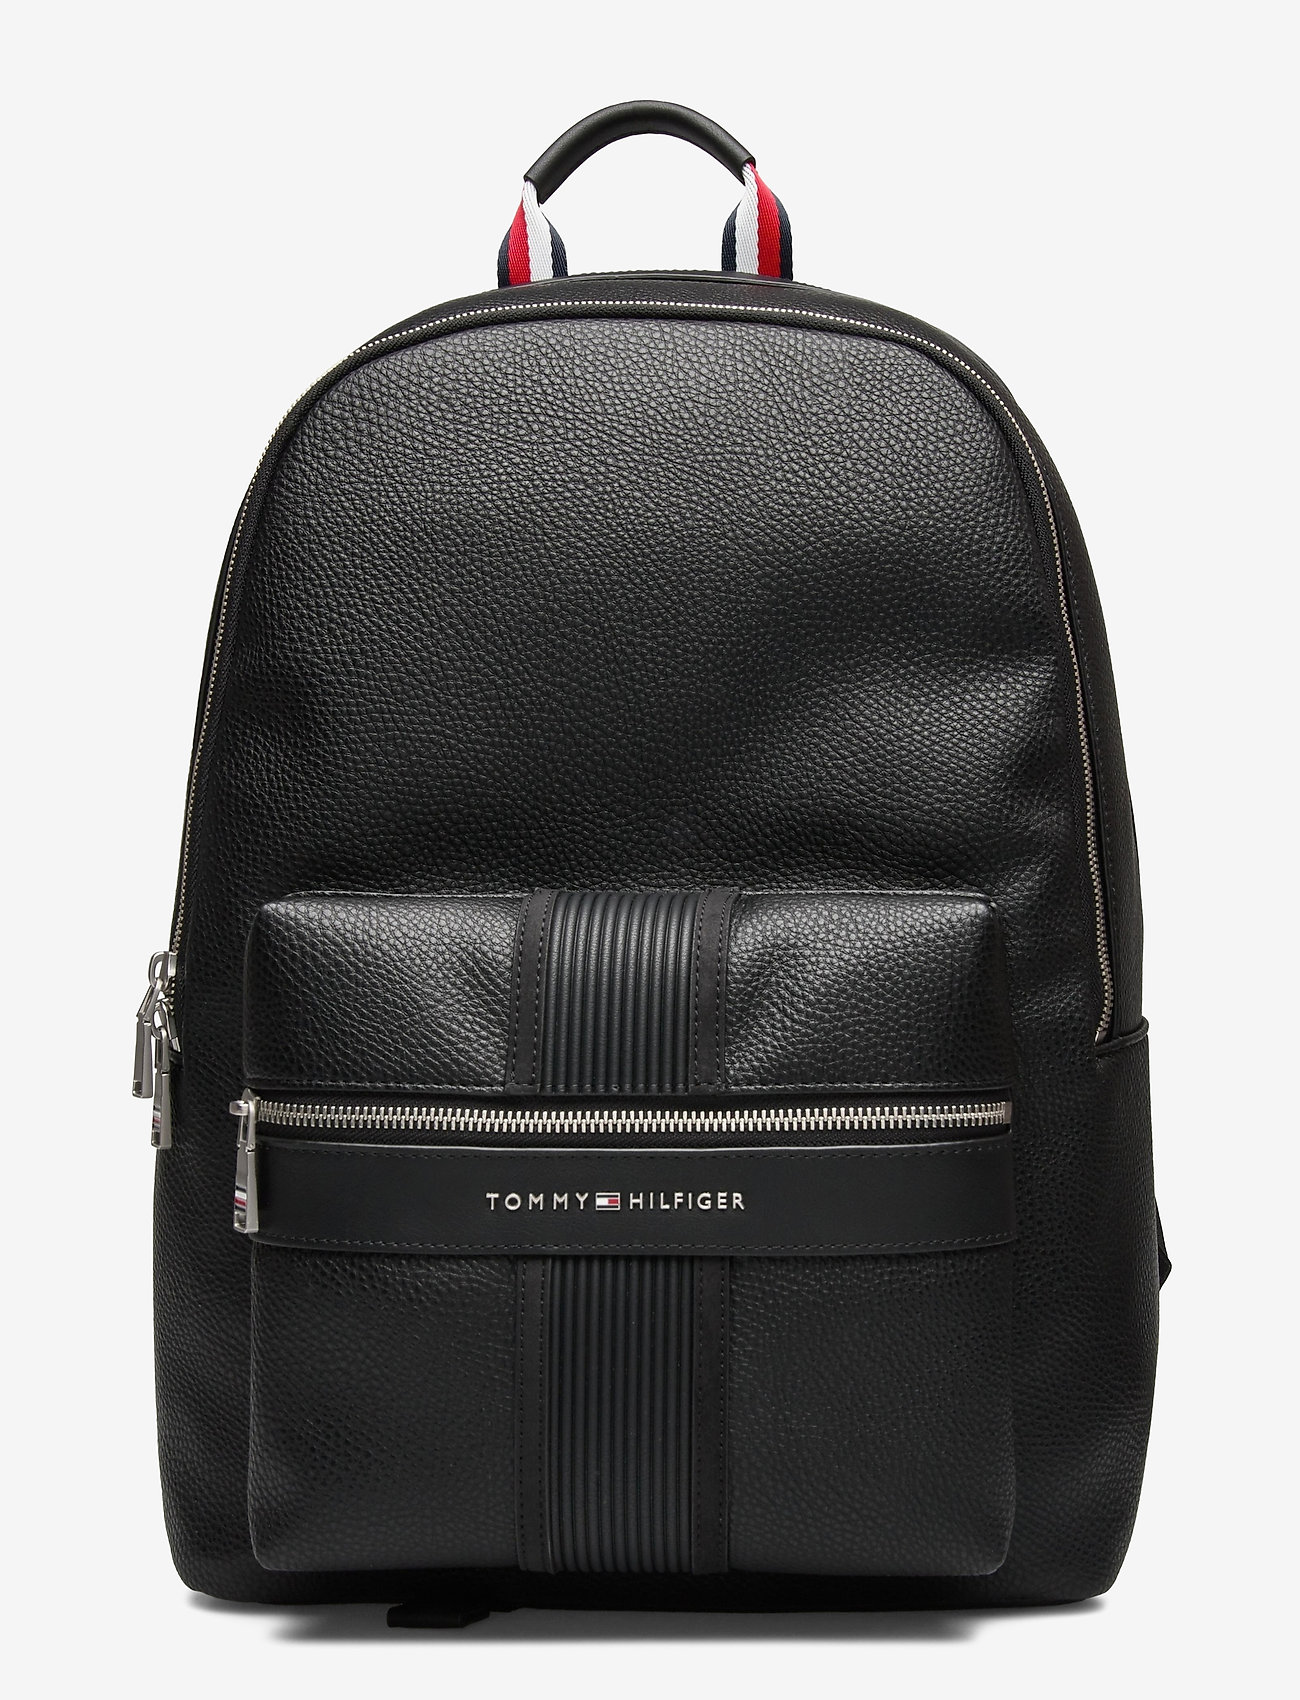 Th Downtown Backpack (Black) (79.95 